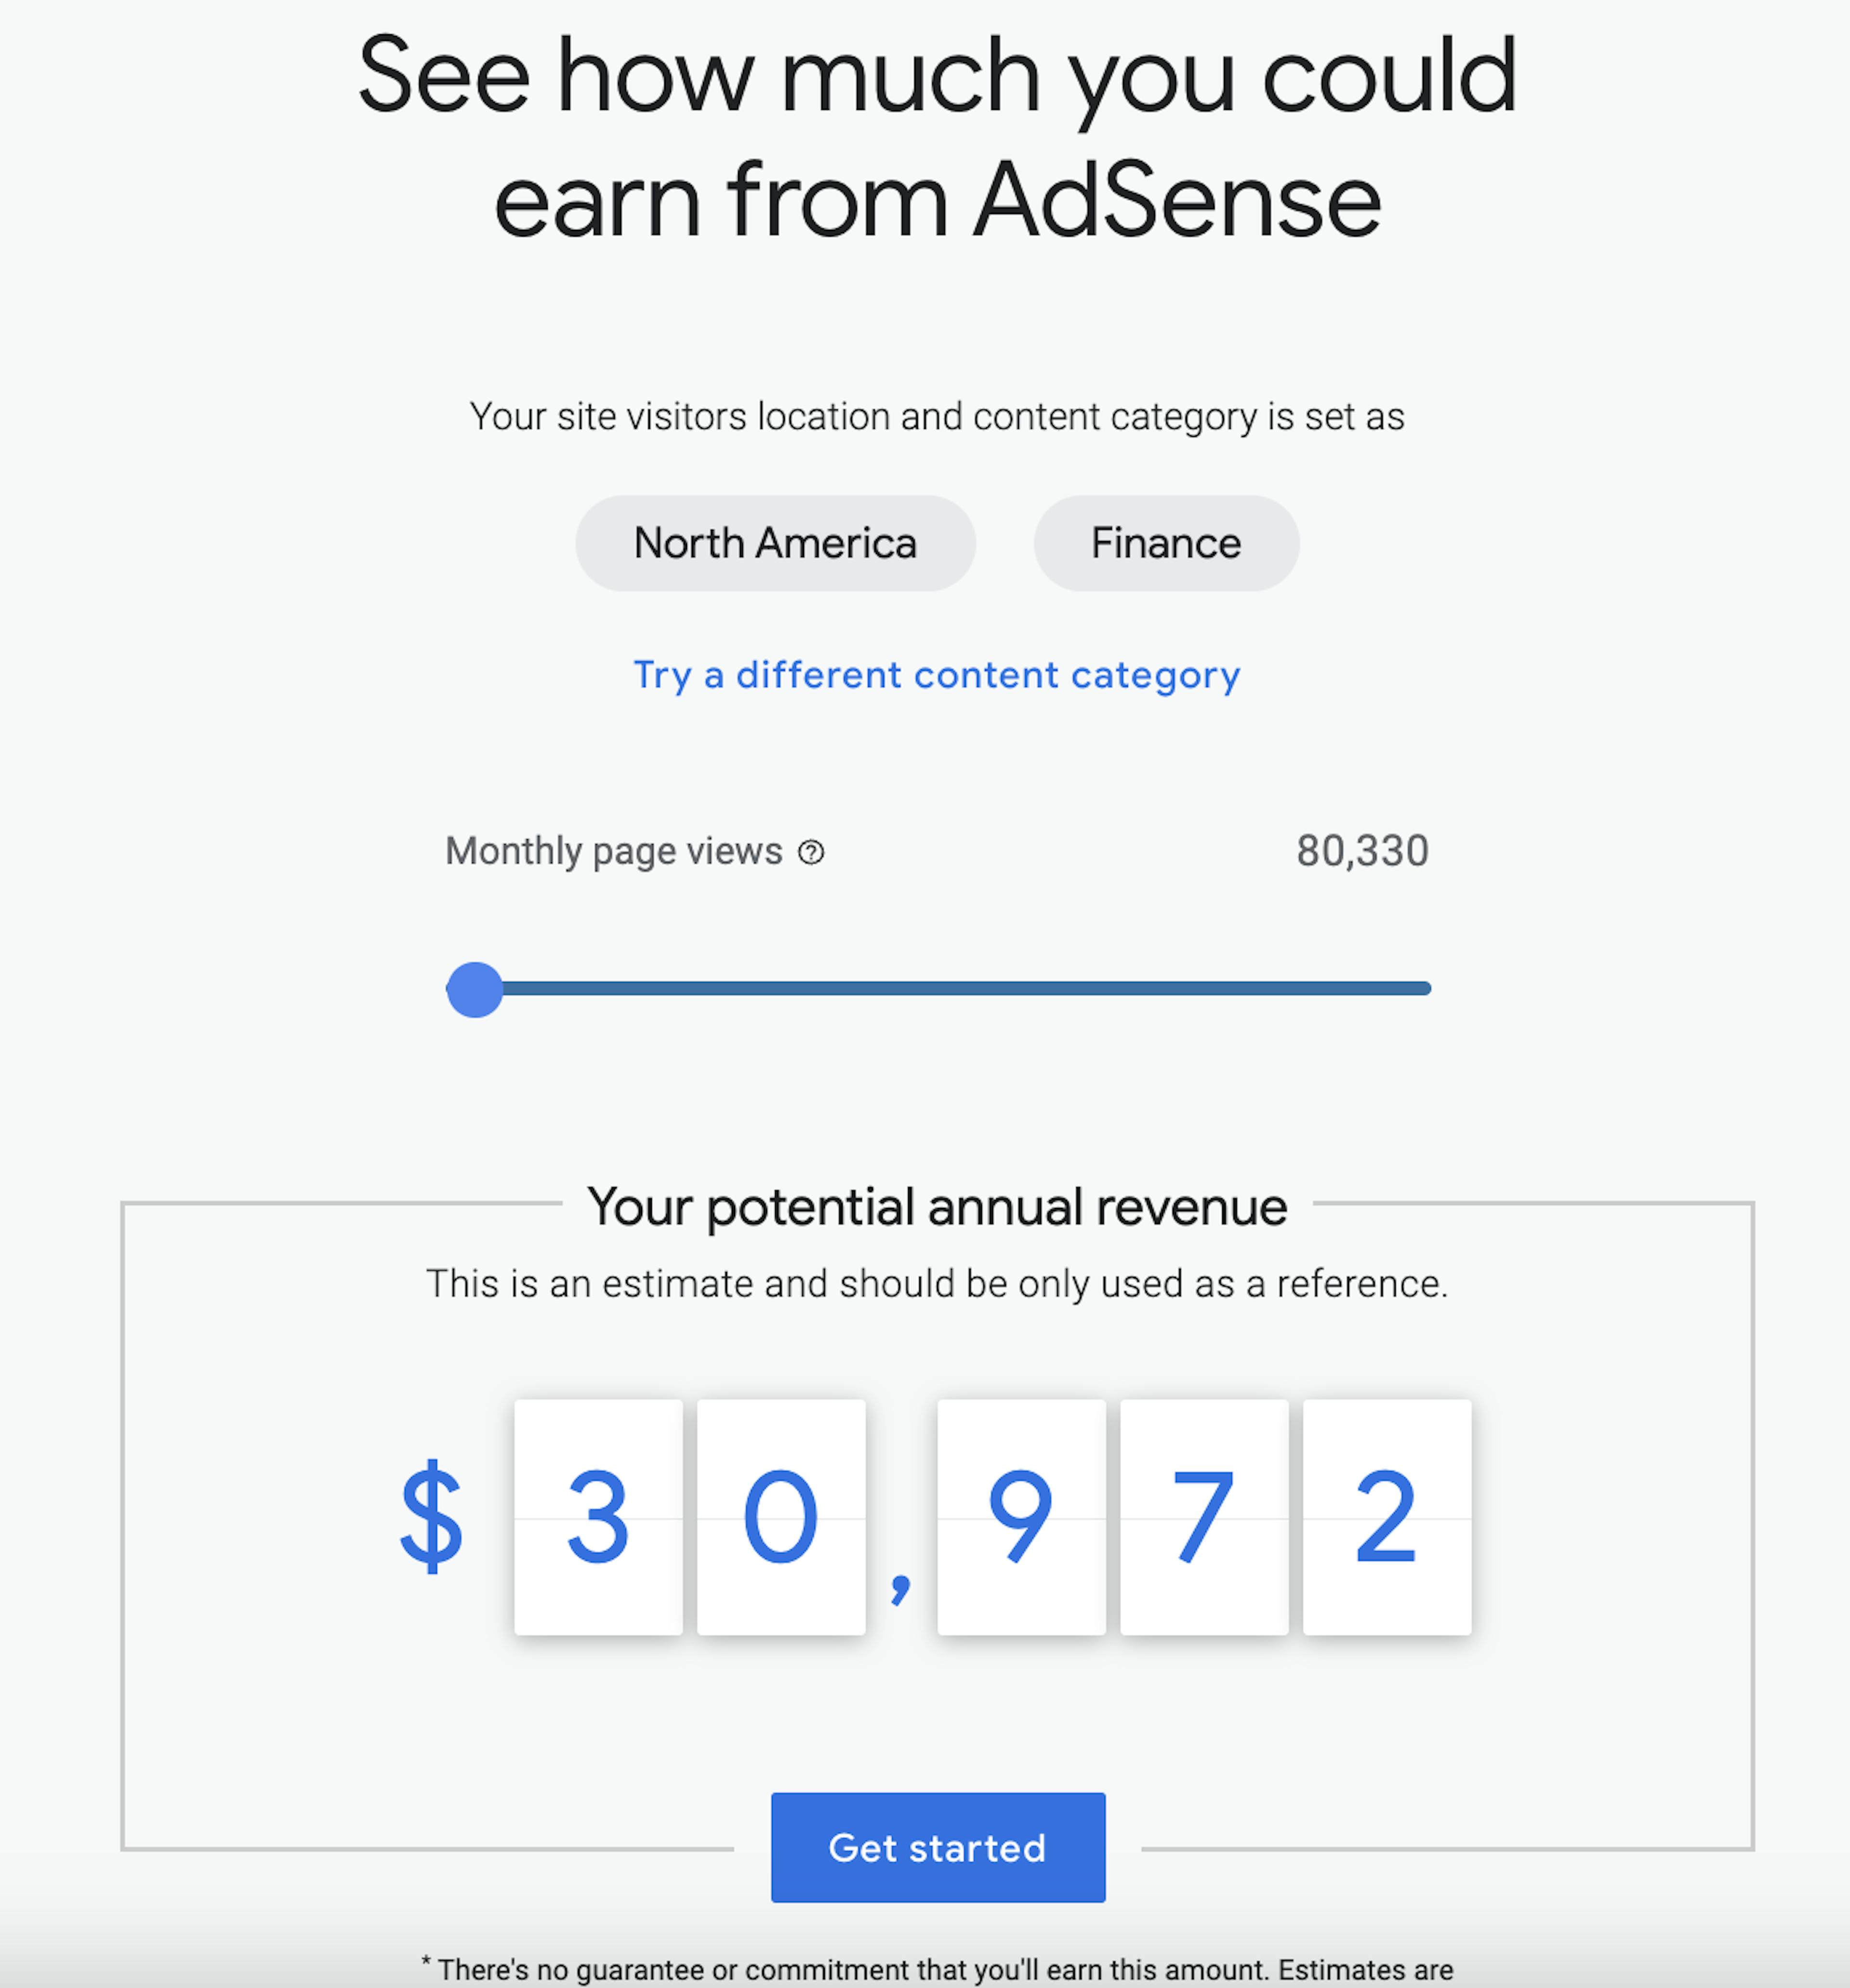 Adsense estimate for Coinchefs traffic of ~80,000 visits